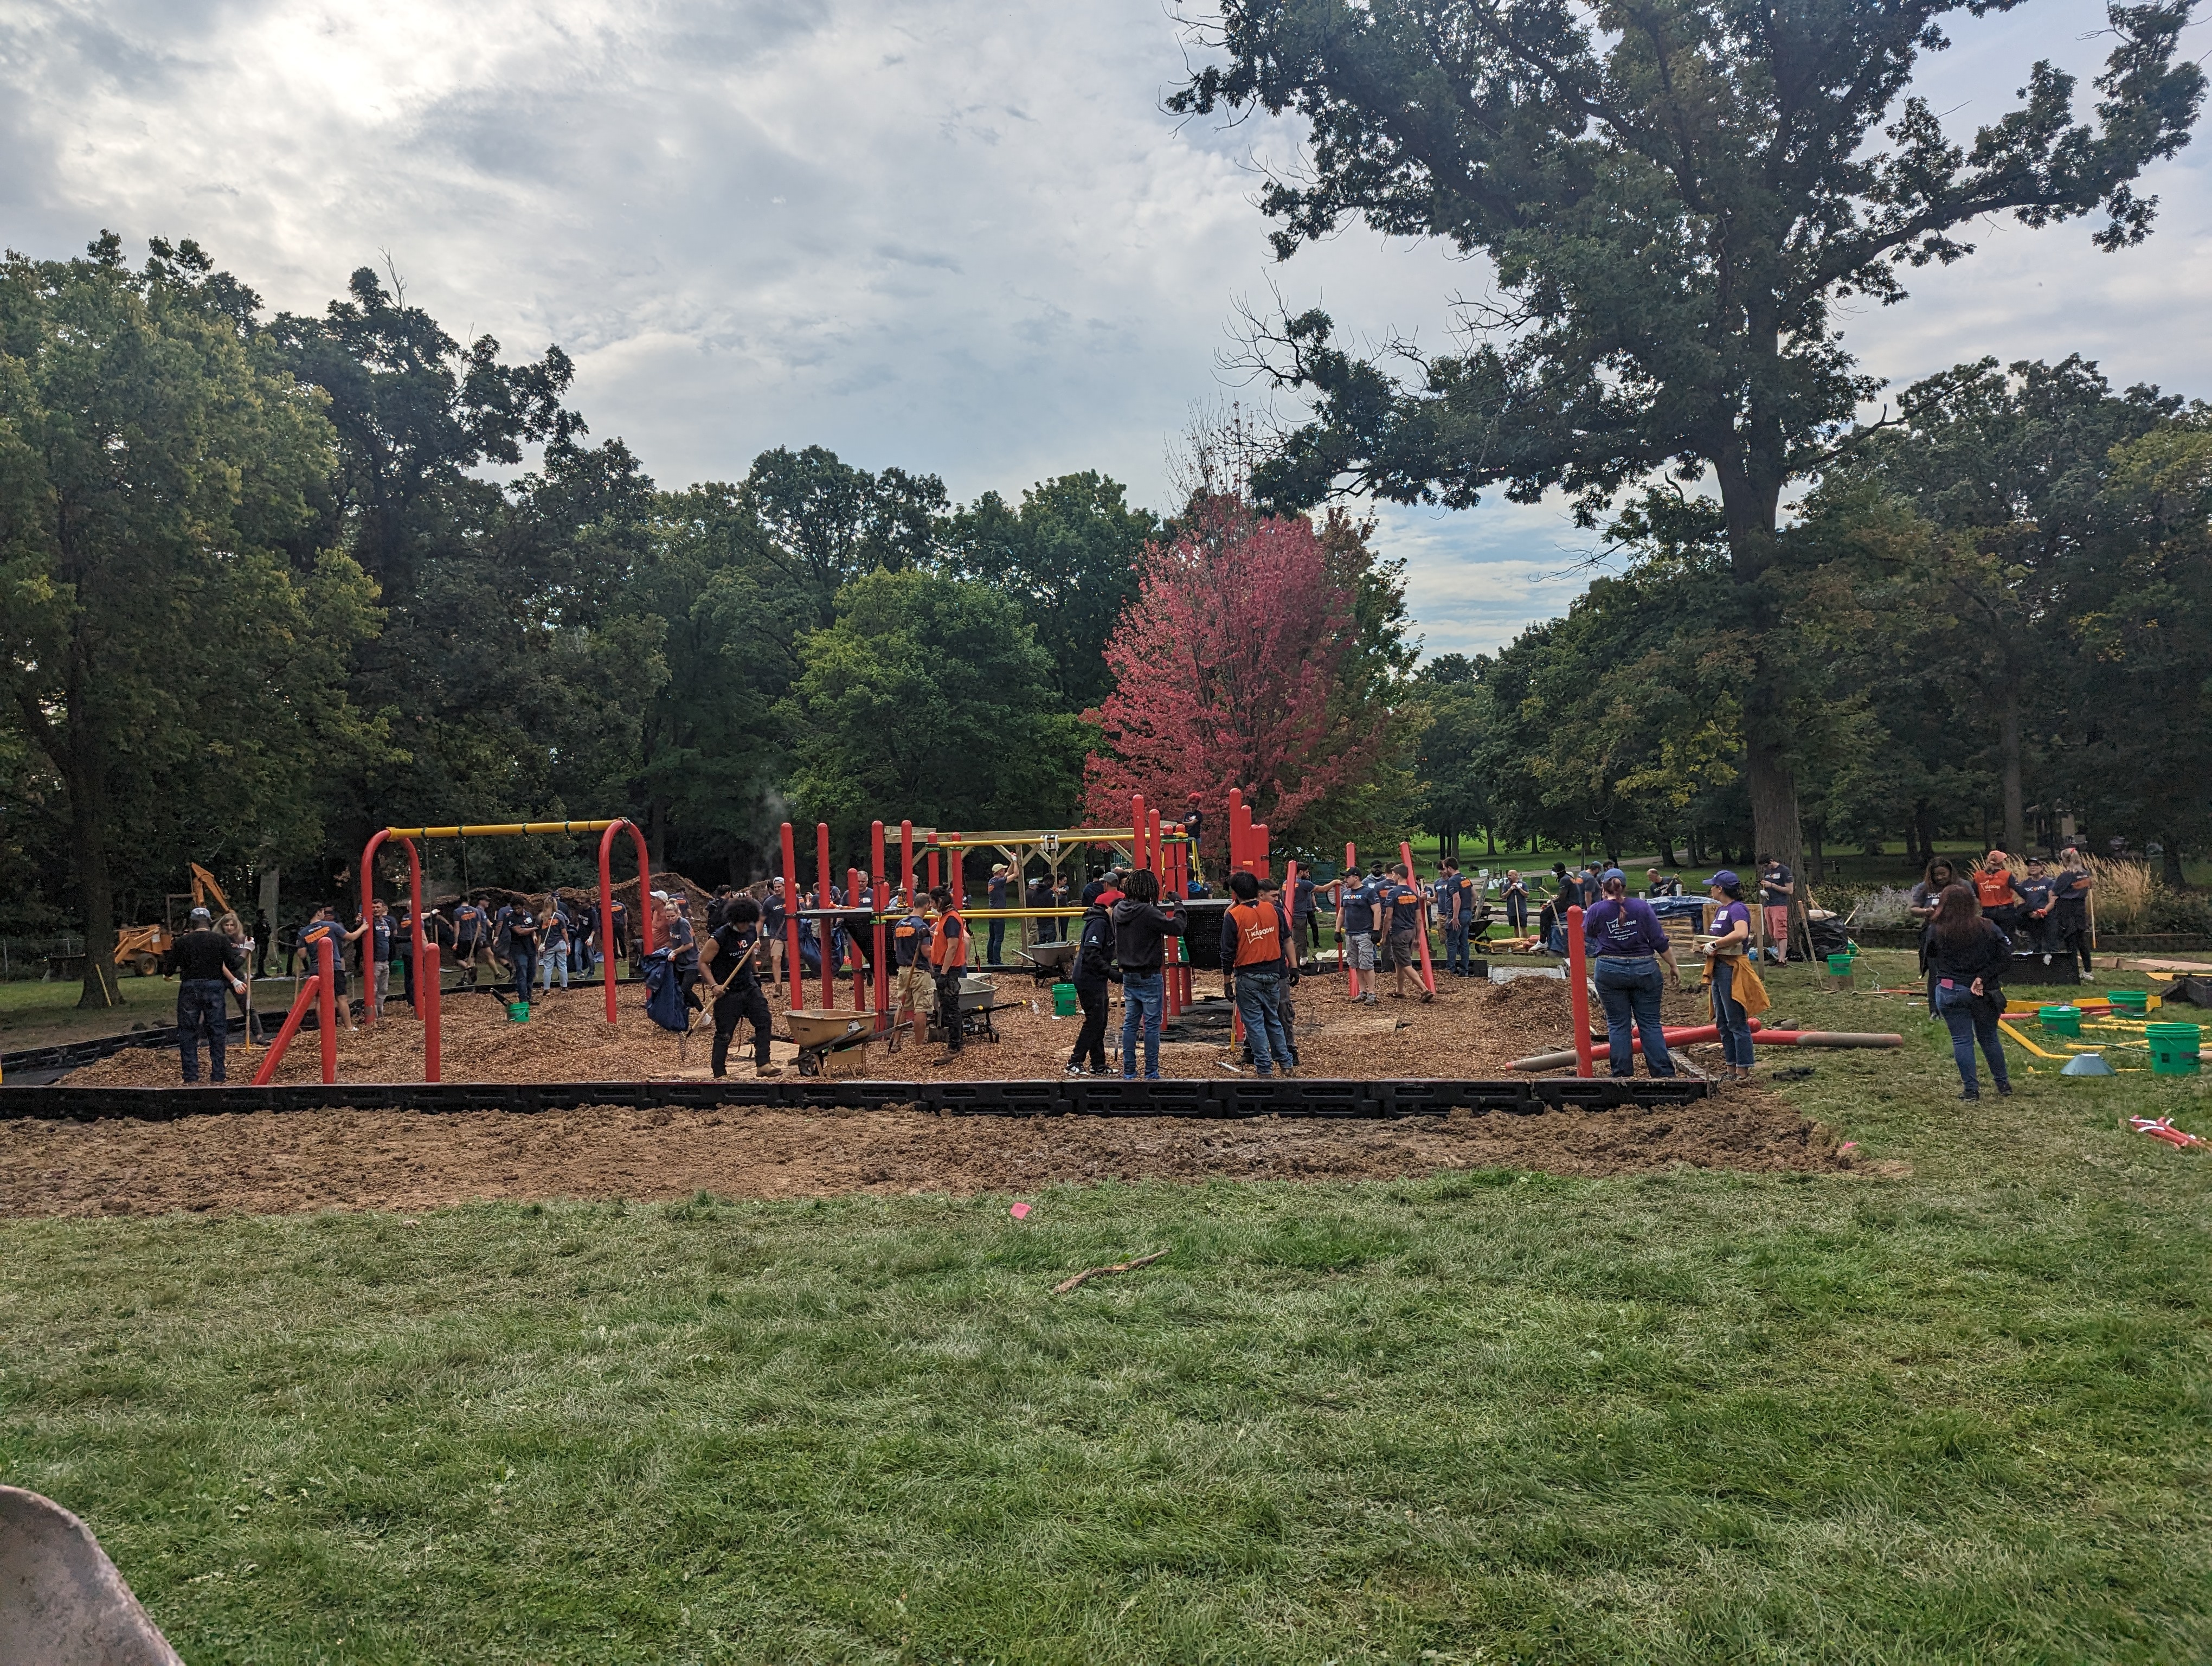 Volunteers build Foss Park playground in North Chicago with design help from kids; ‘They were a driving force of what you see’